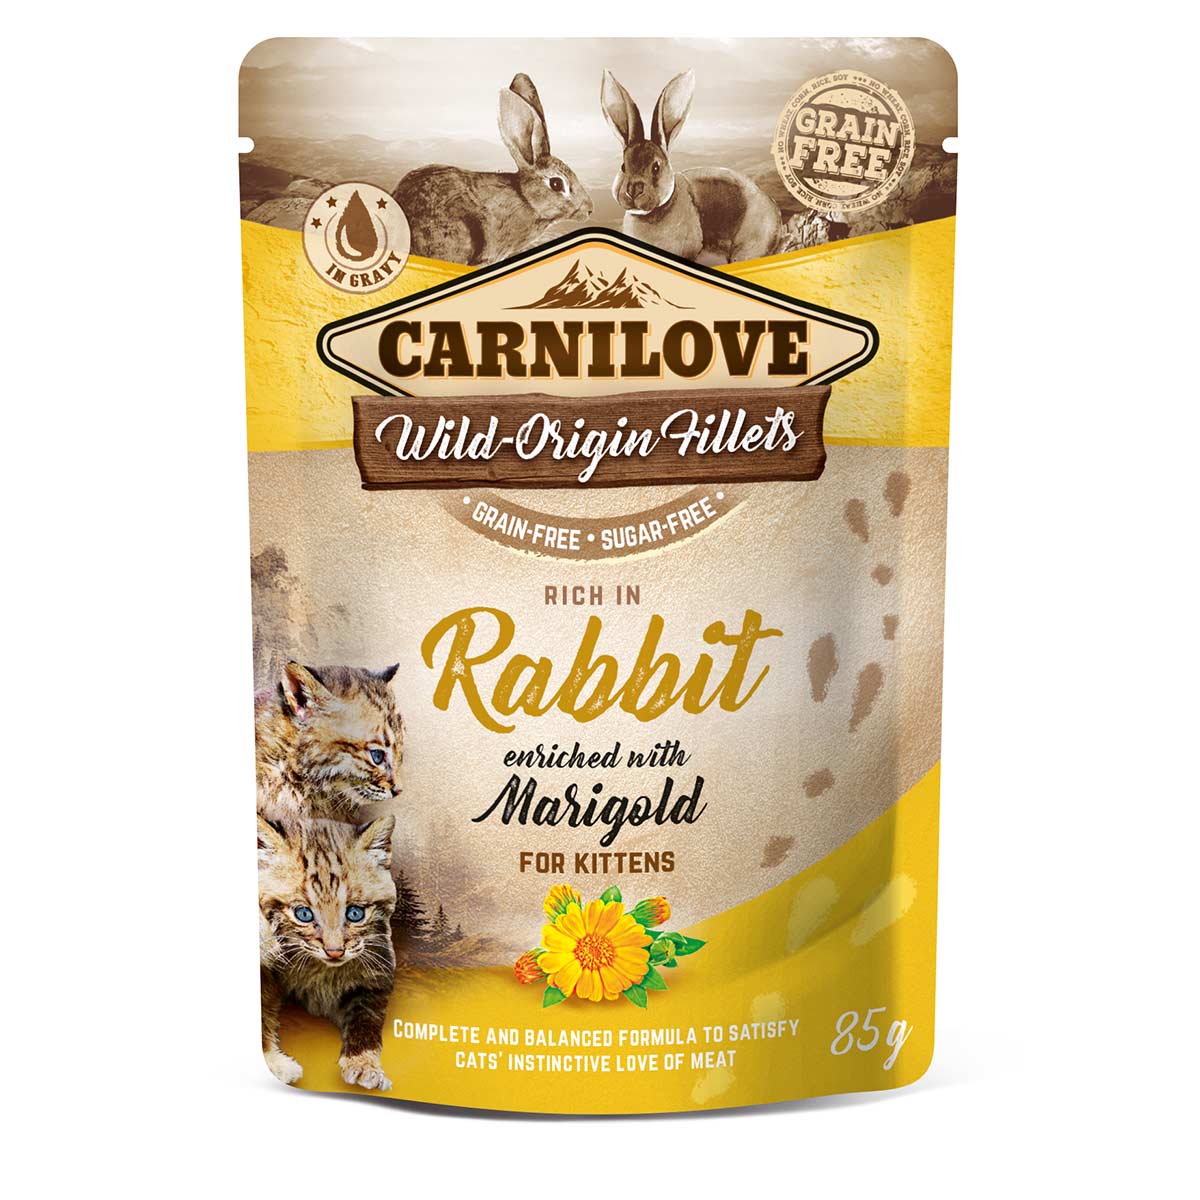 Carnilove Cat Pouch Ragout - Rabbit enriched with Marigold for Kittens 24x85g von Carnilove